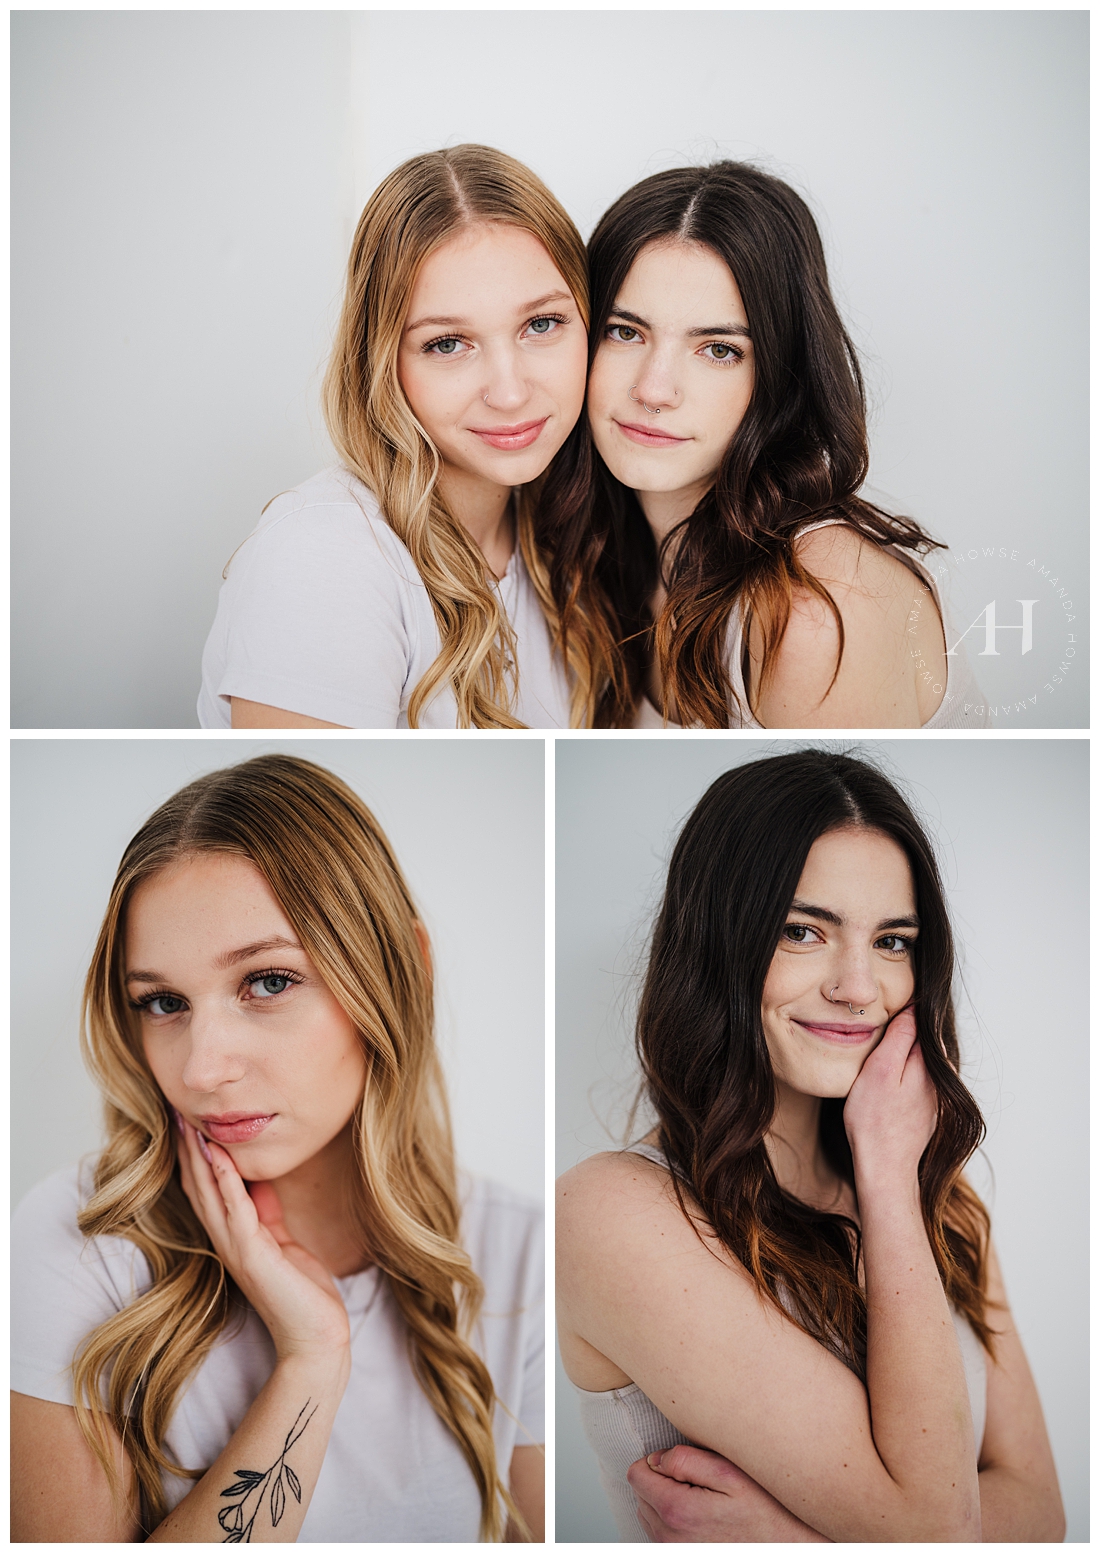 Need a Gift For Your BFF? We've Got You Covered! | Studio253 Portraits | Amanda Howse Photography